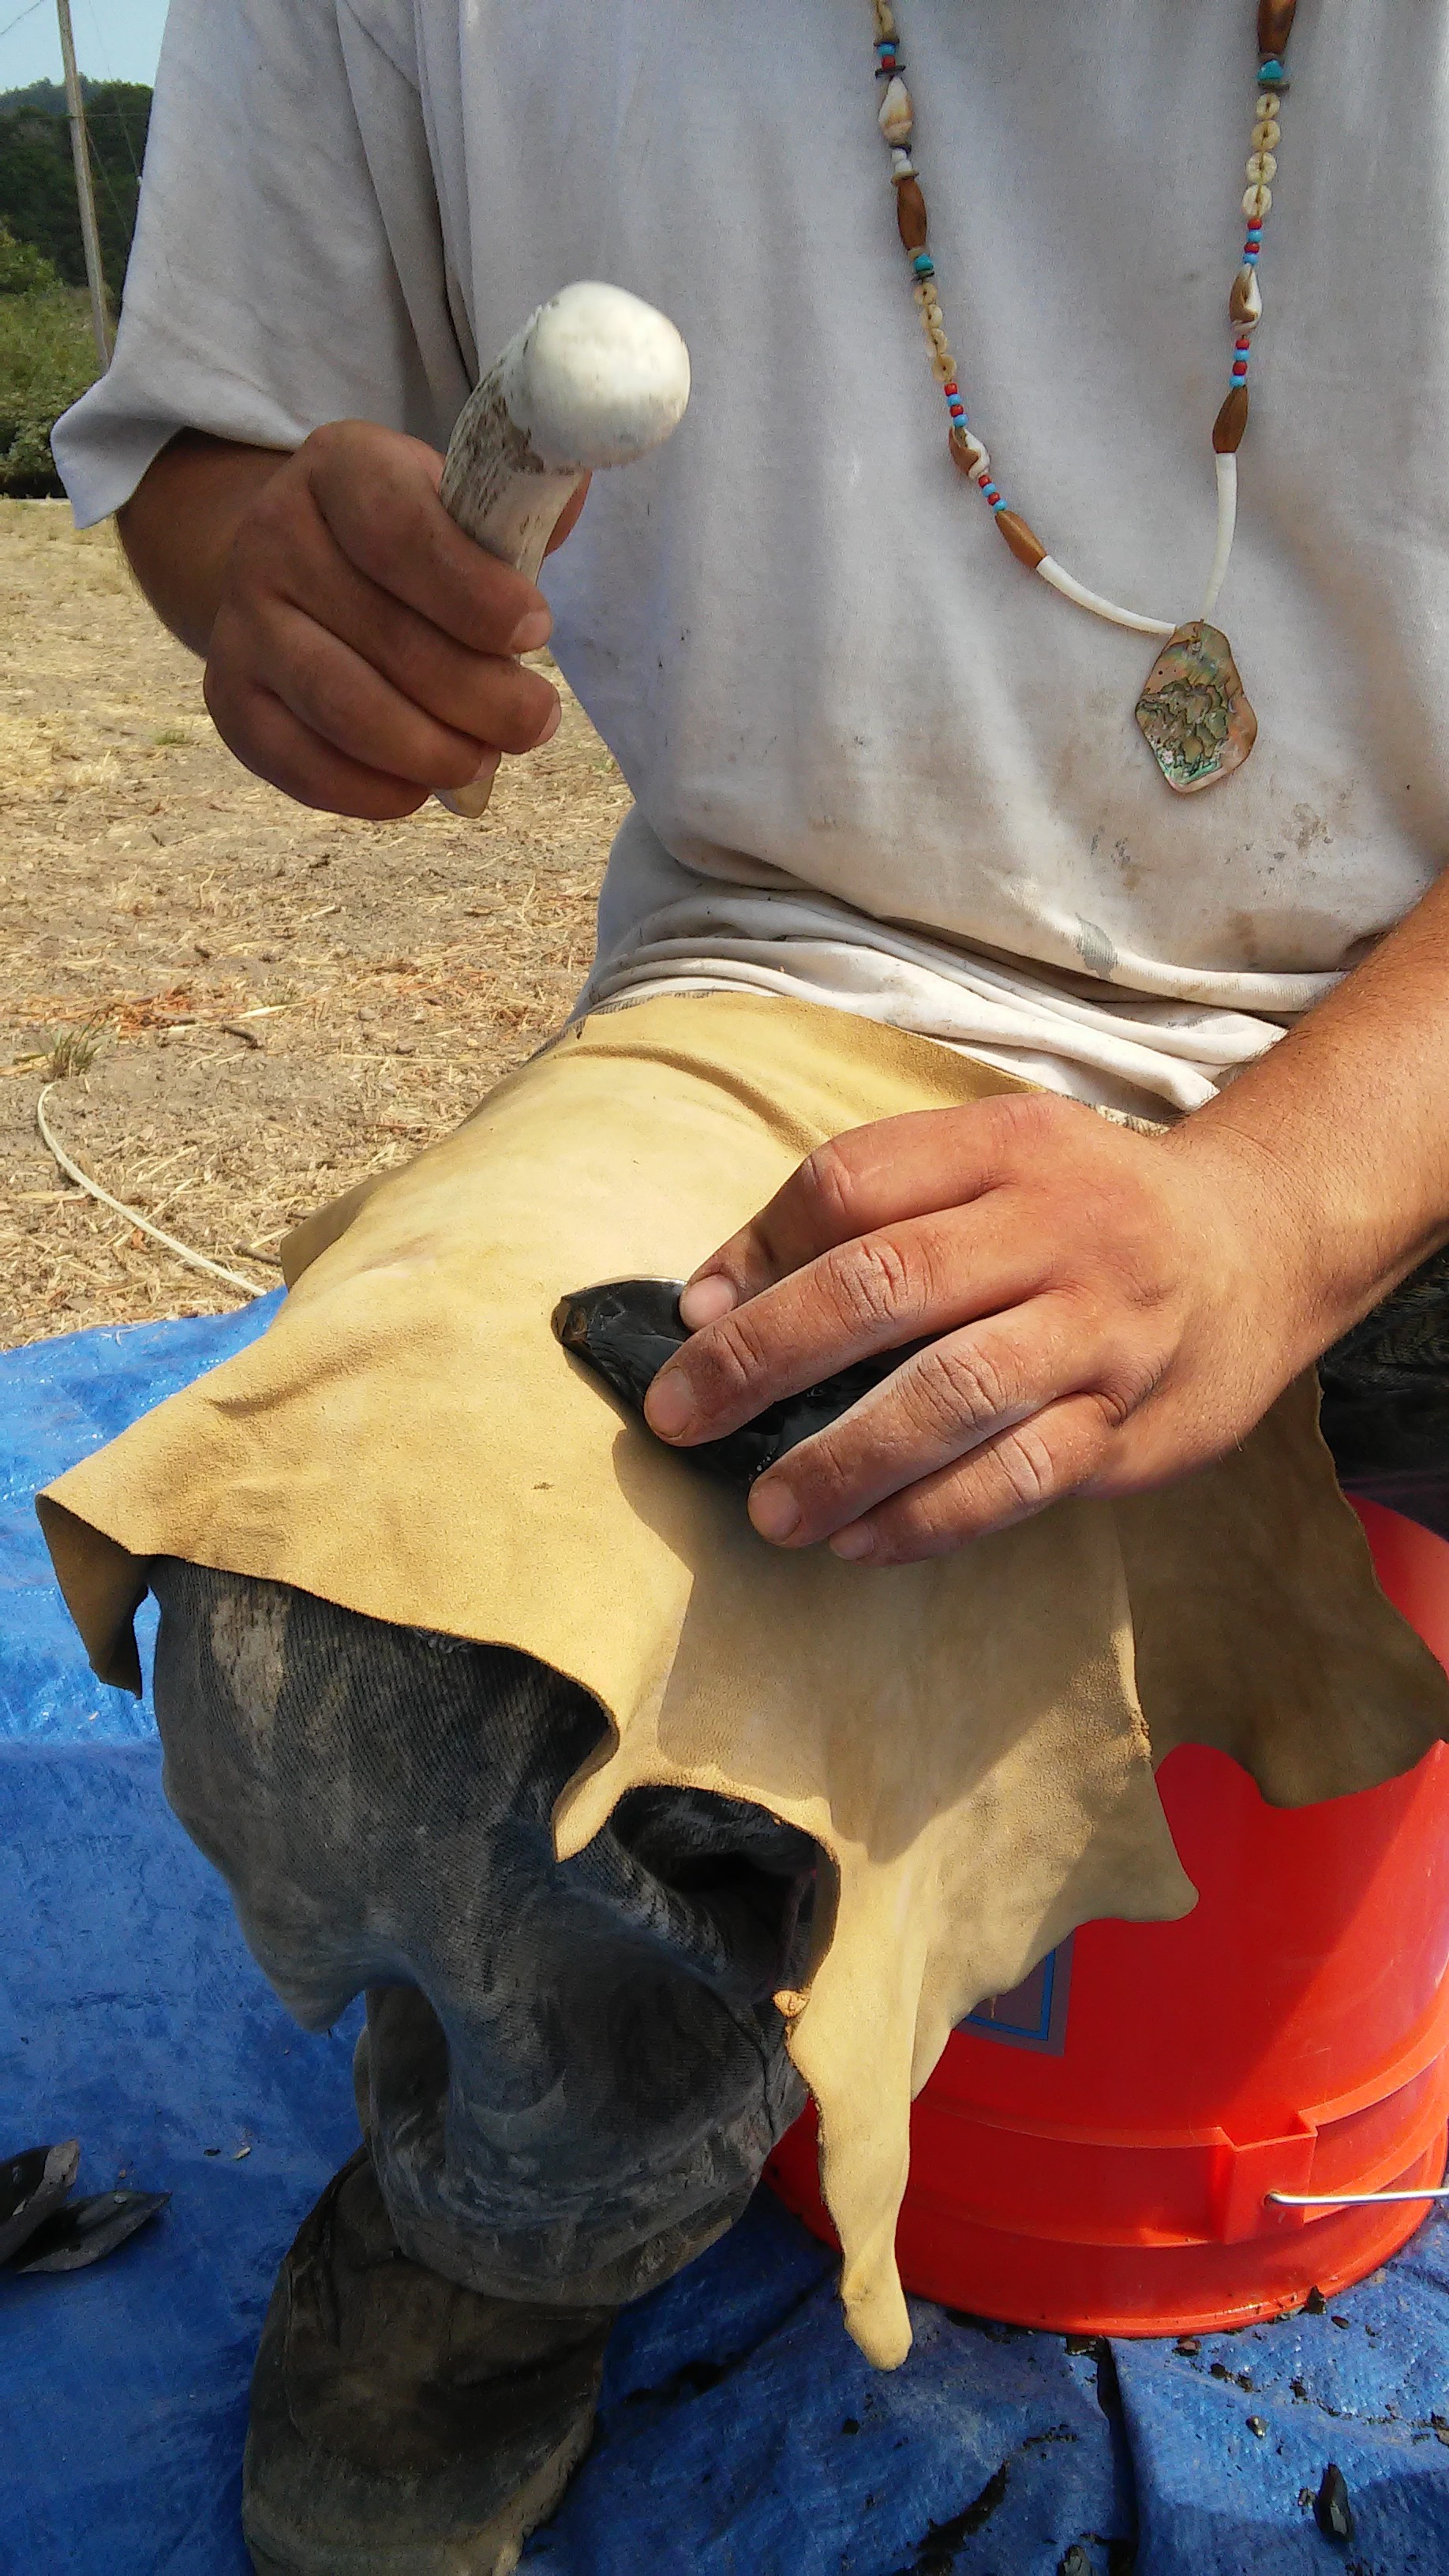 Native Steward Paul Lopez uses an elk antler to flake an obsidian core in an arrowhead-making demonstration. Native Stewards learn and practice traditional crafts and skills at Stewardship Corps, keeping skills like flintknapping alive within the Amah Mutsun Tribal Band.